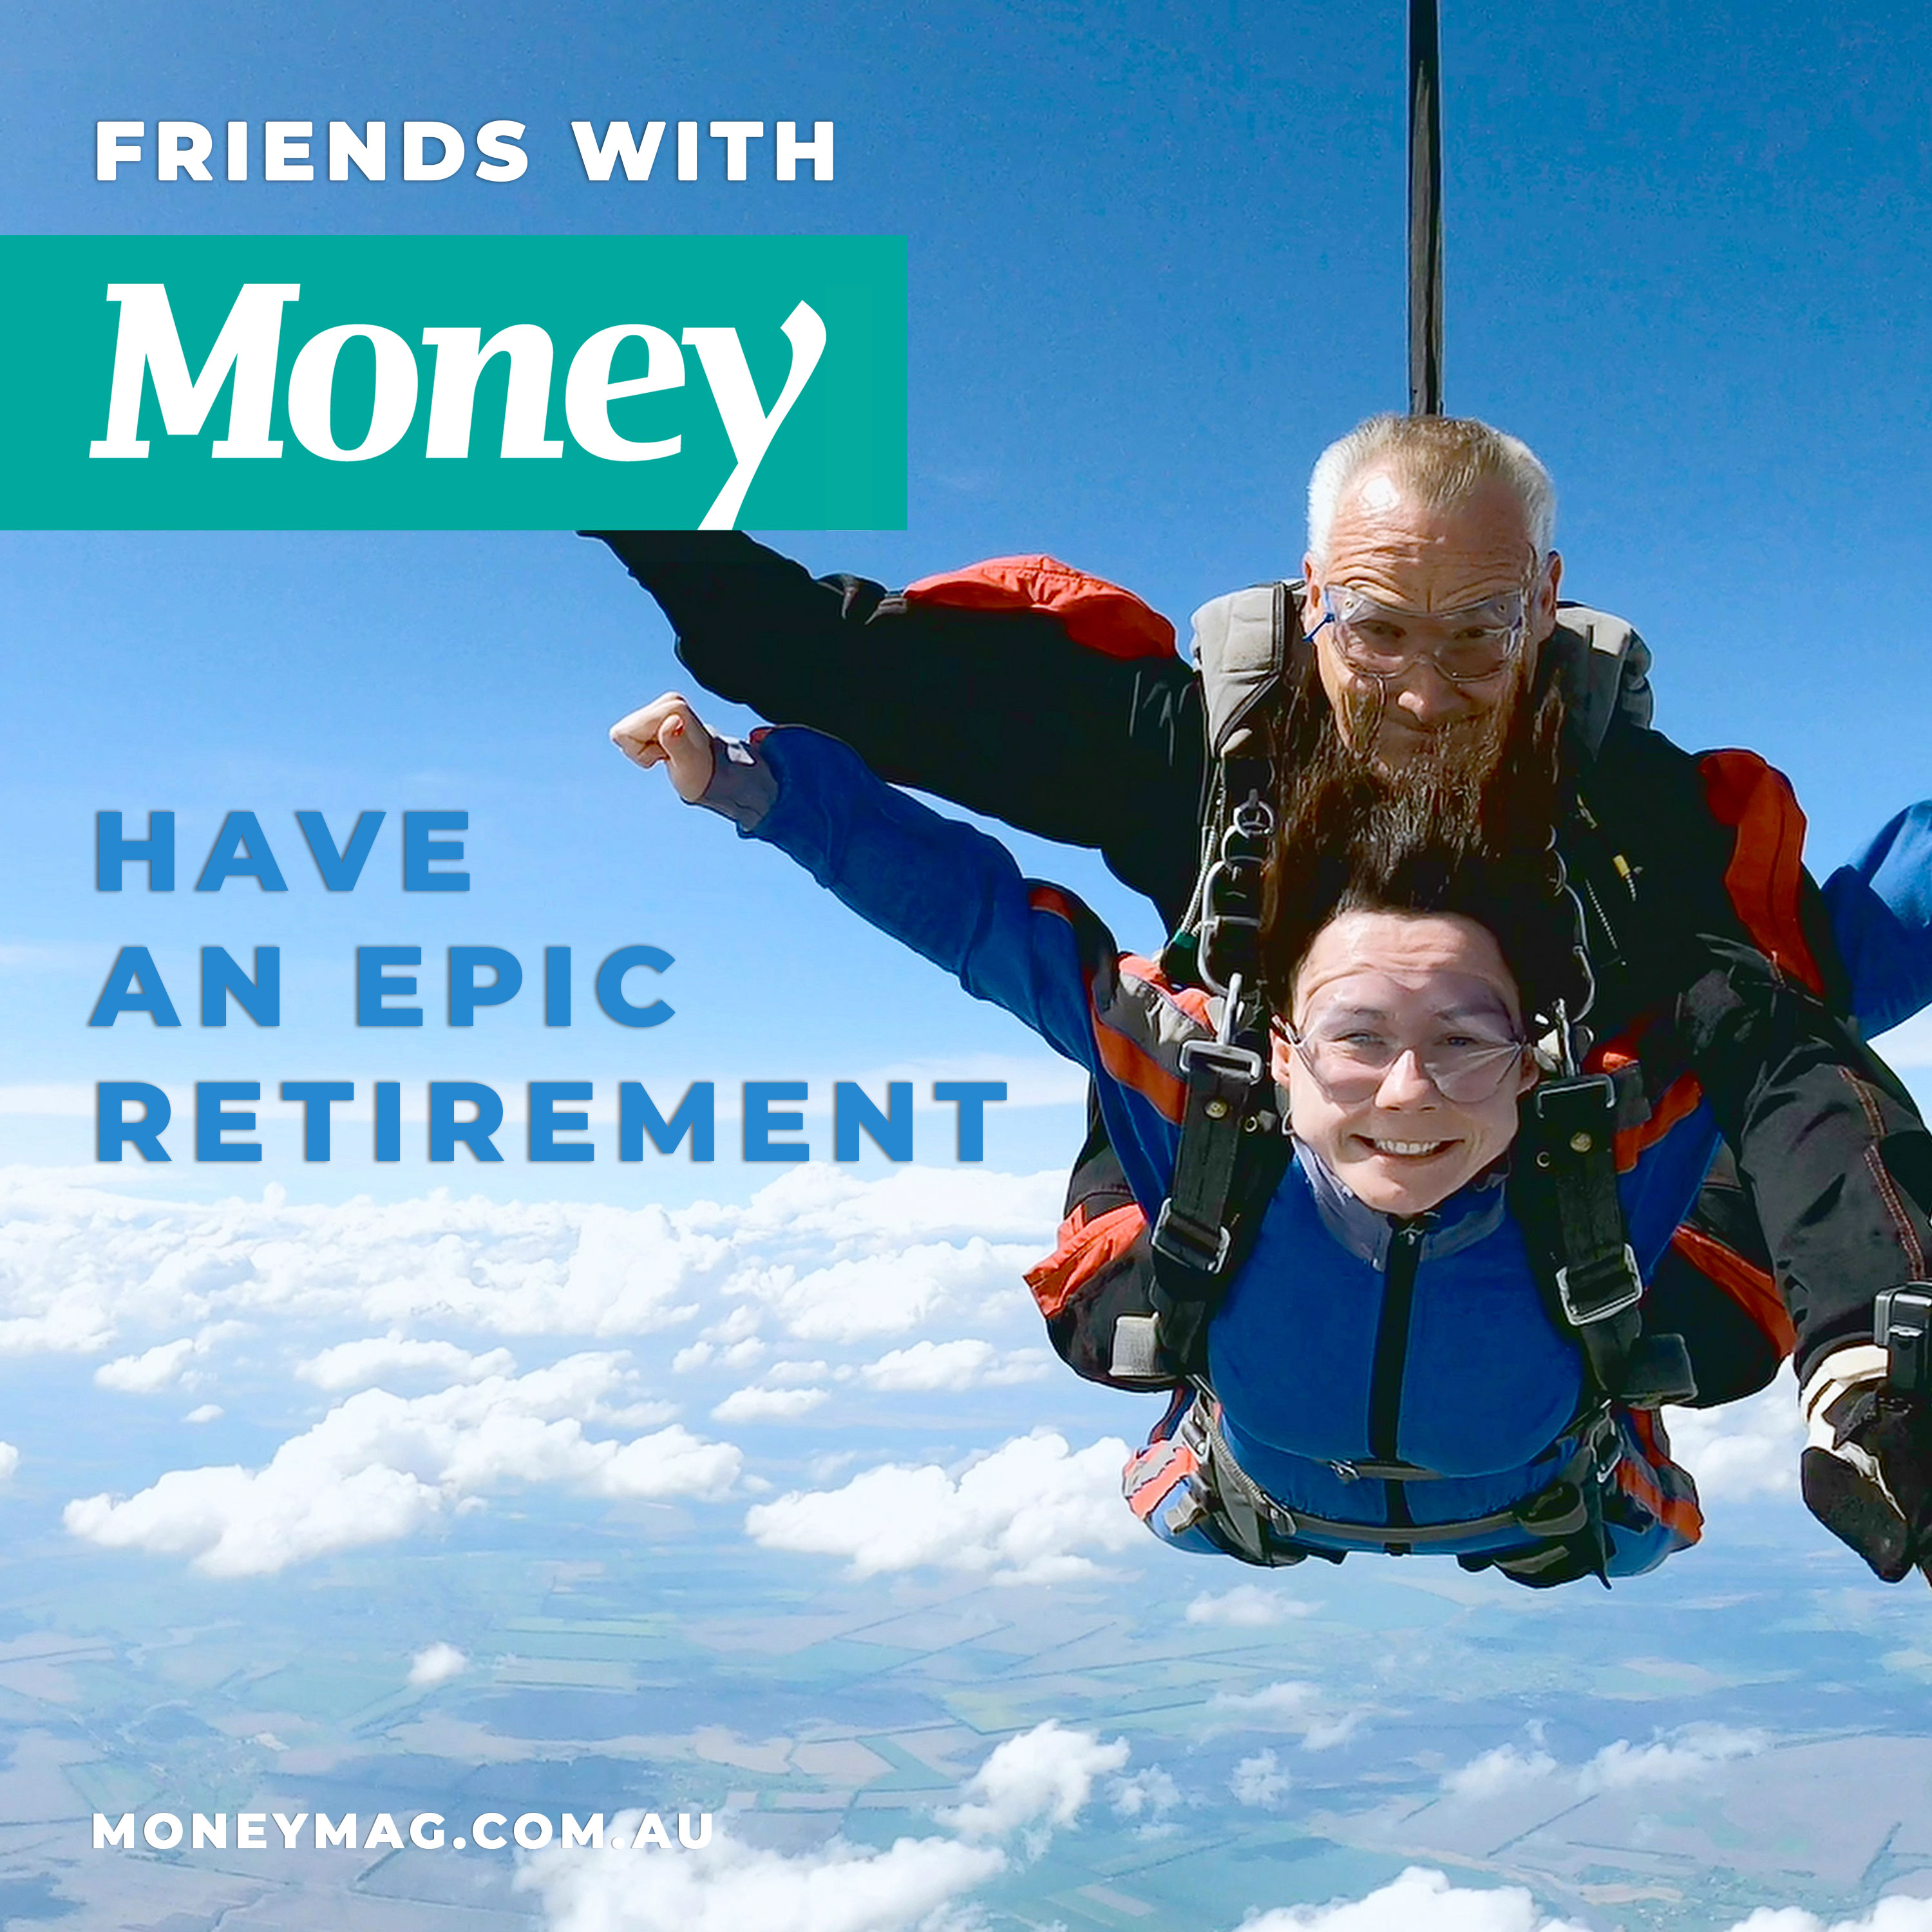 Have an epic retirement